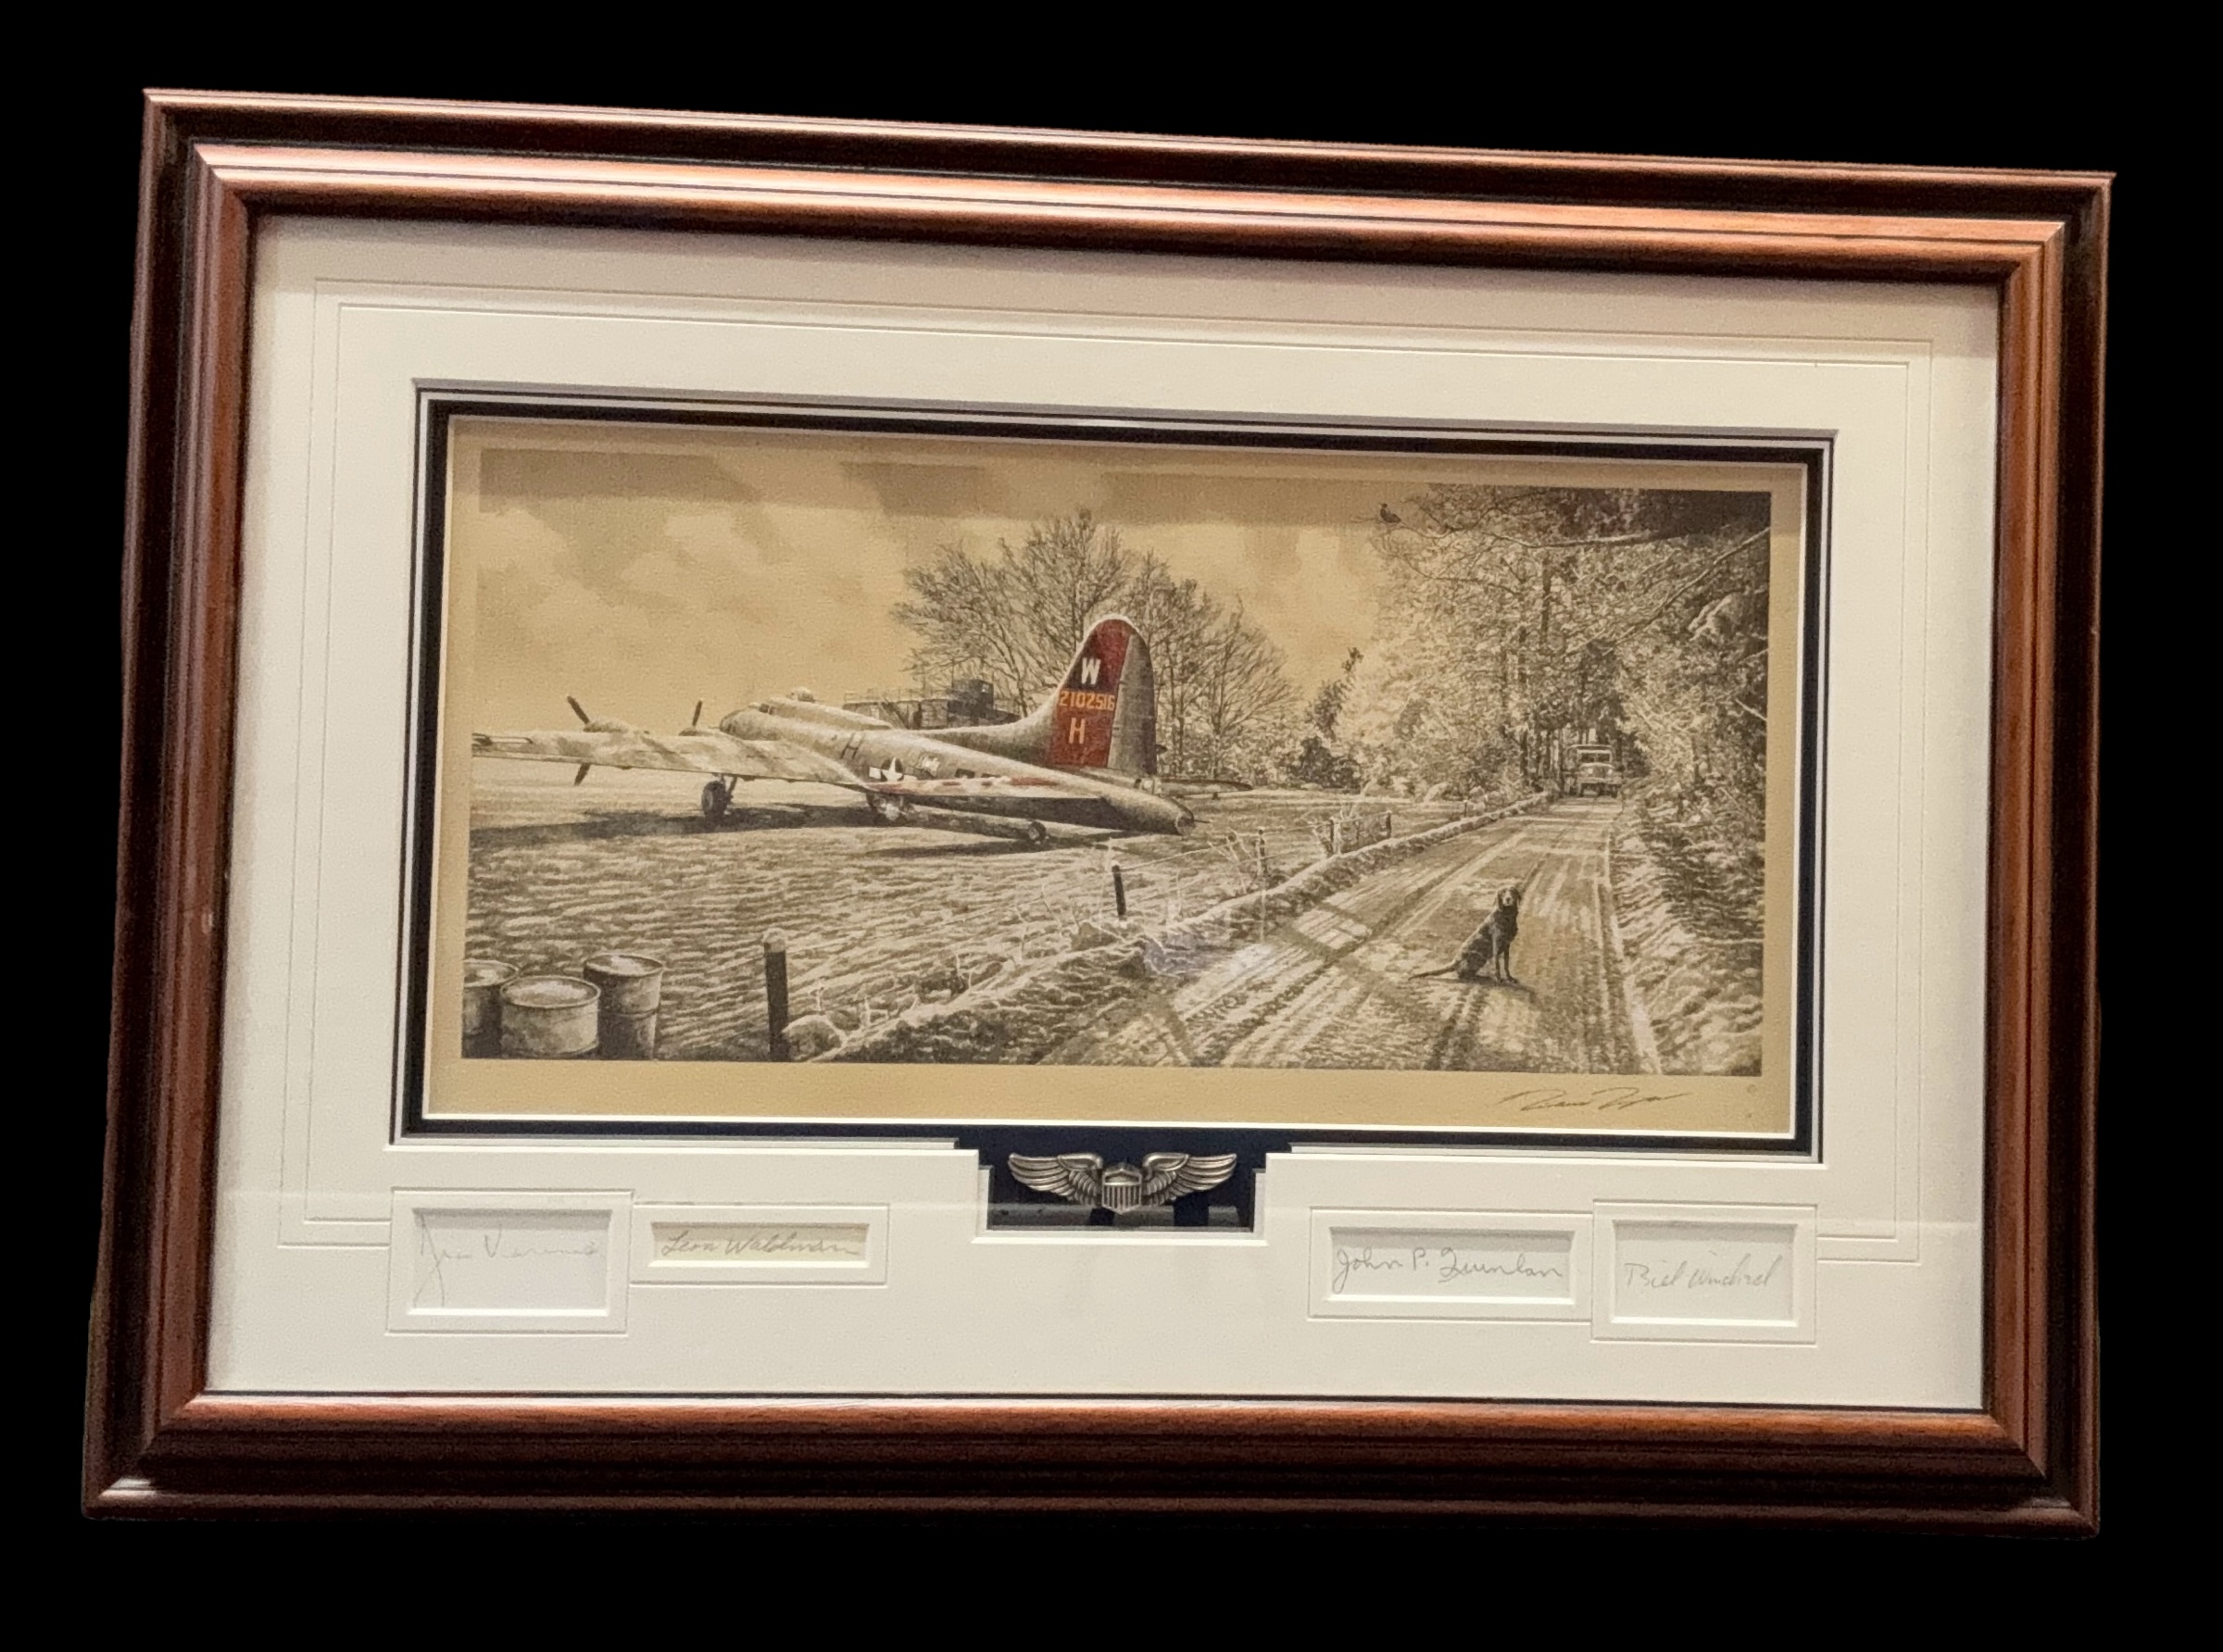 WW2 Print titled Fortress at Rest by Richard Taylor, multi signed by the artist Richard Taylor and - Image 2 of 3